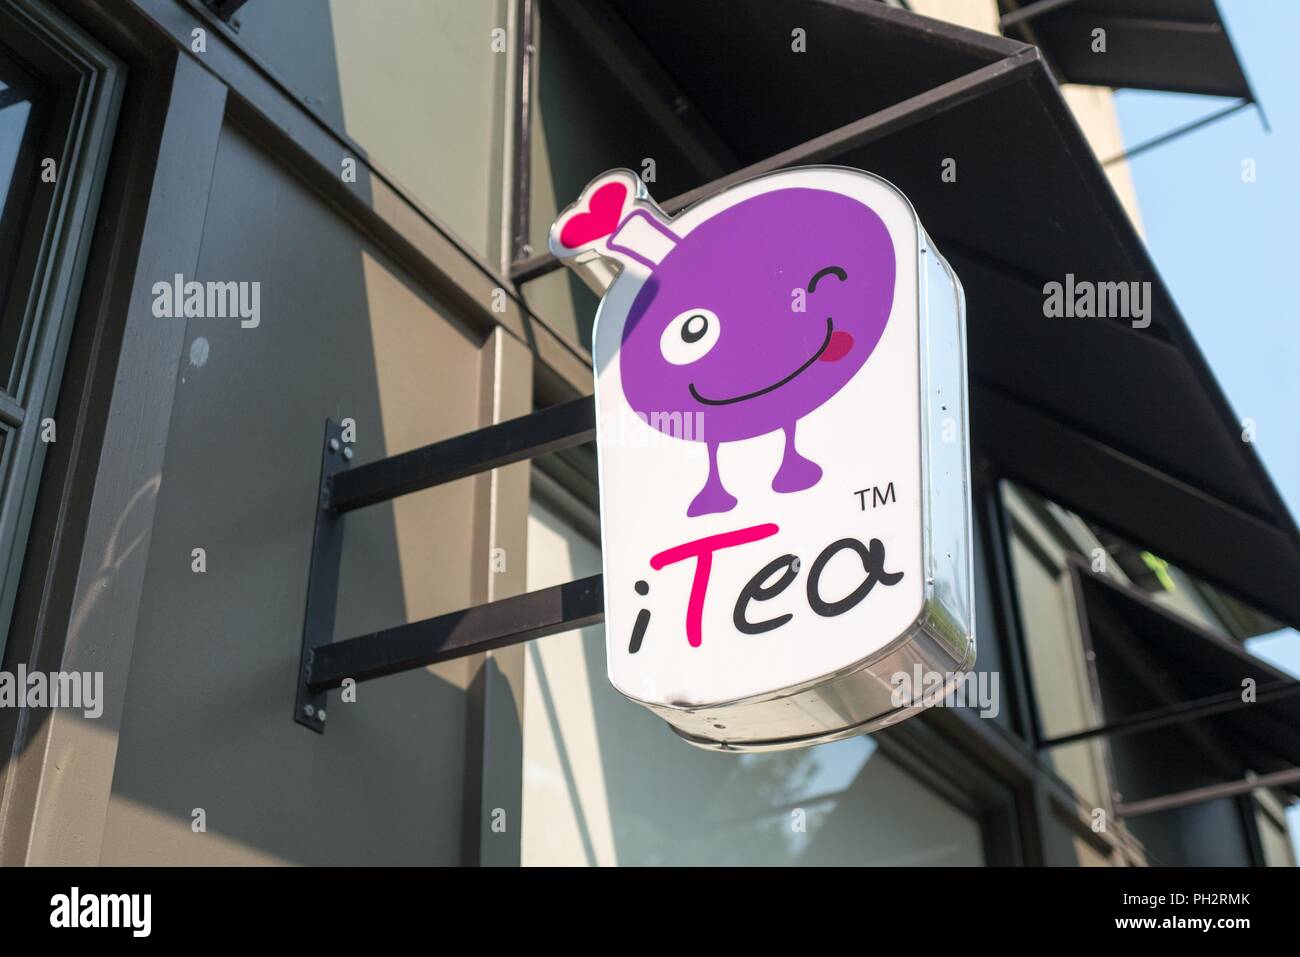 https://c8.alamy.com/comp/PH2RMK/close-up-of-sign-for-itea-a-taiwanese-bubble-tea-restaurant-in-the-san-francisco-bay-area-town-of-walnut-creek-california-august-6-2018-PH2RMK.jpg